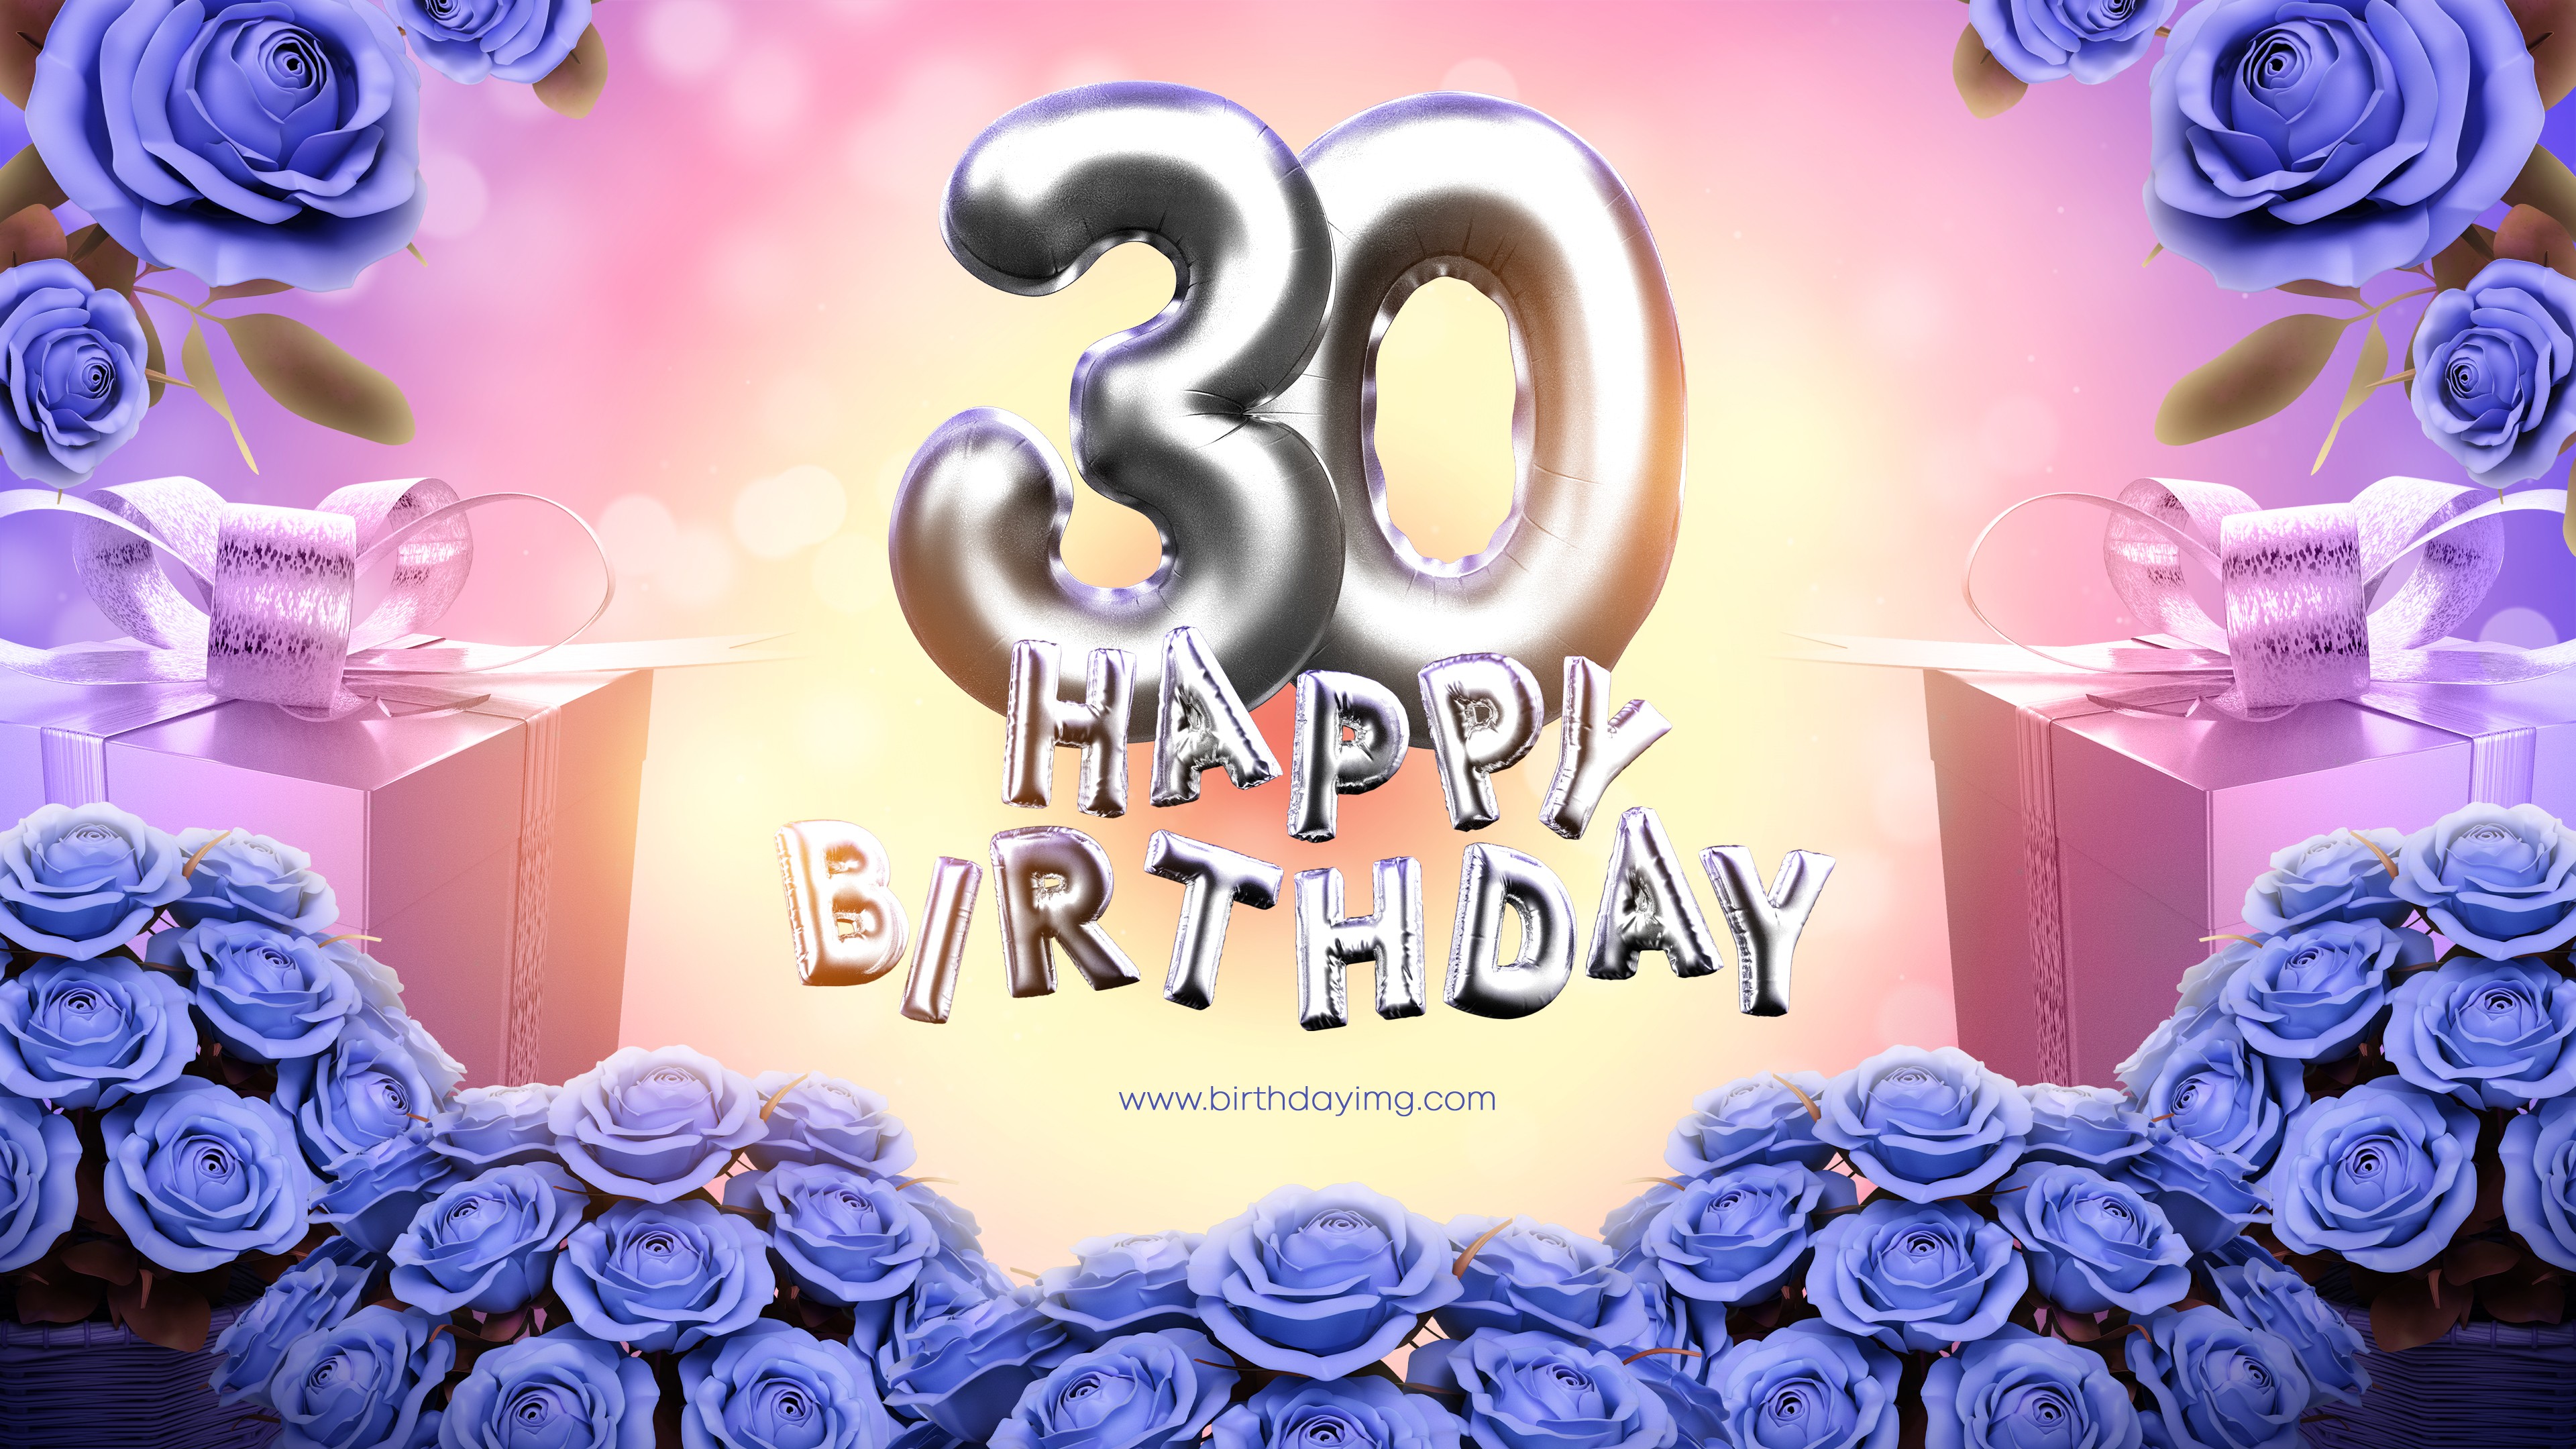 Free 30 Years Happy Birthday Wallpaper with Blue Roses